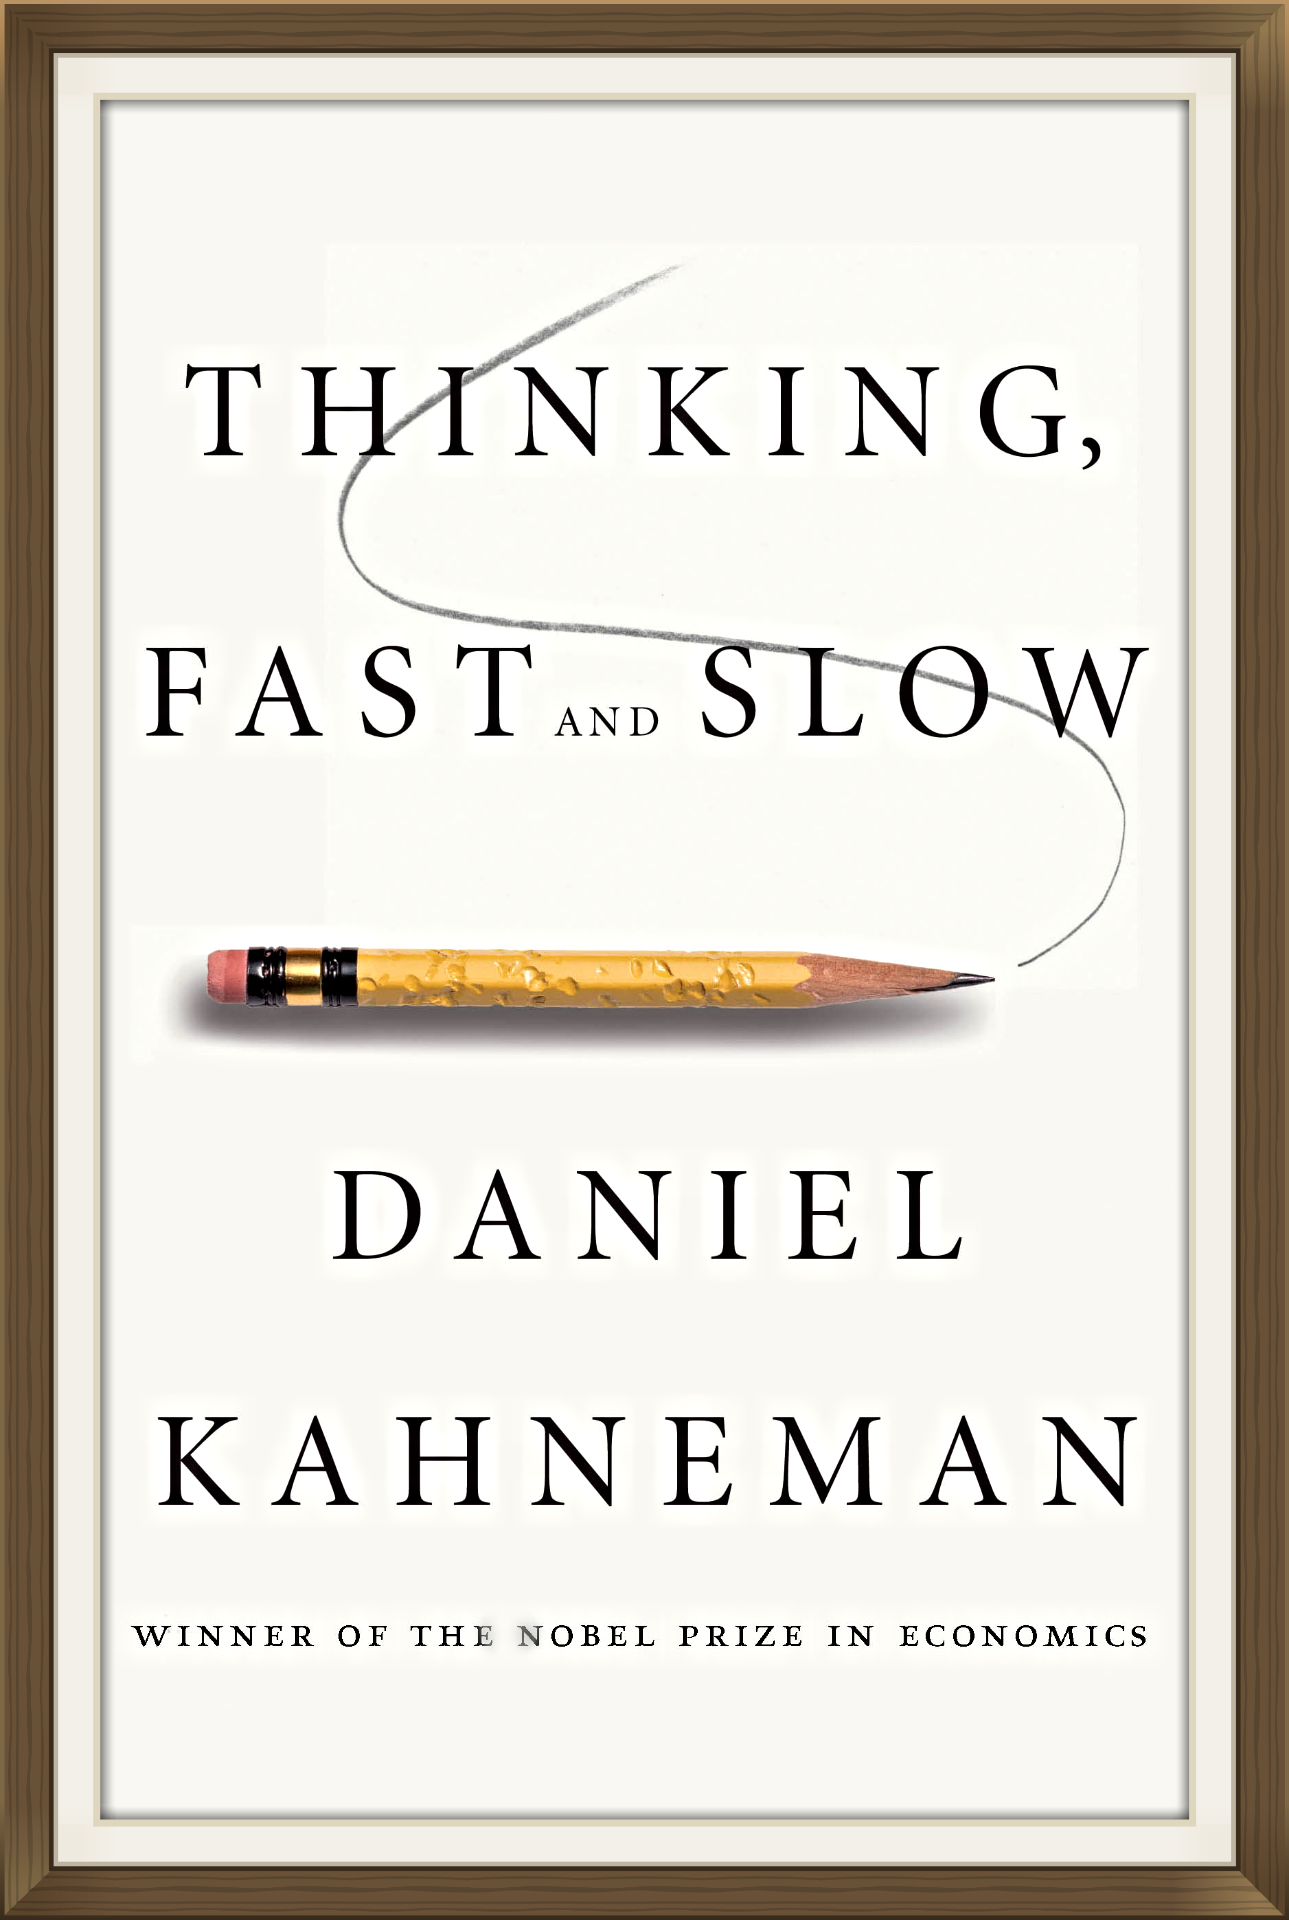 Thinking, Fast and Slow book summary